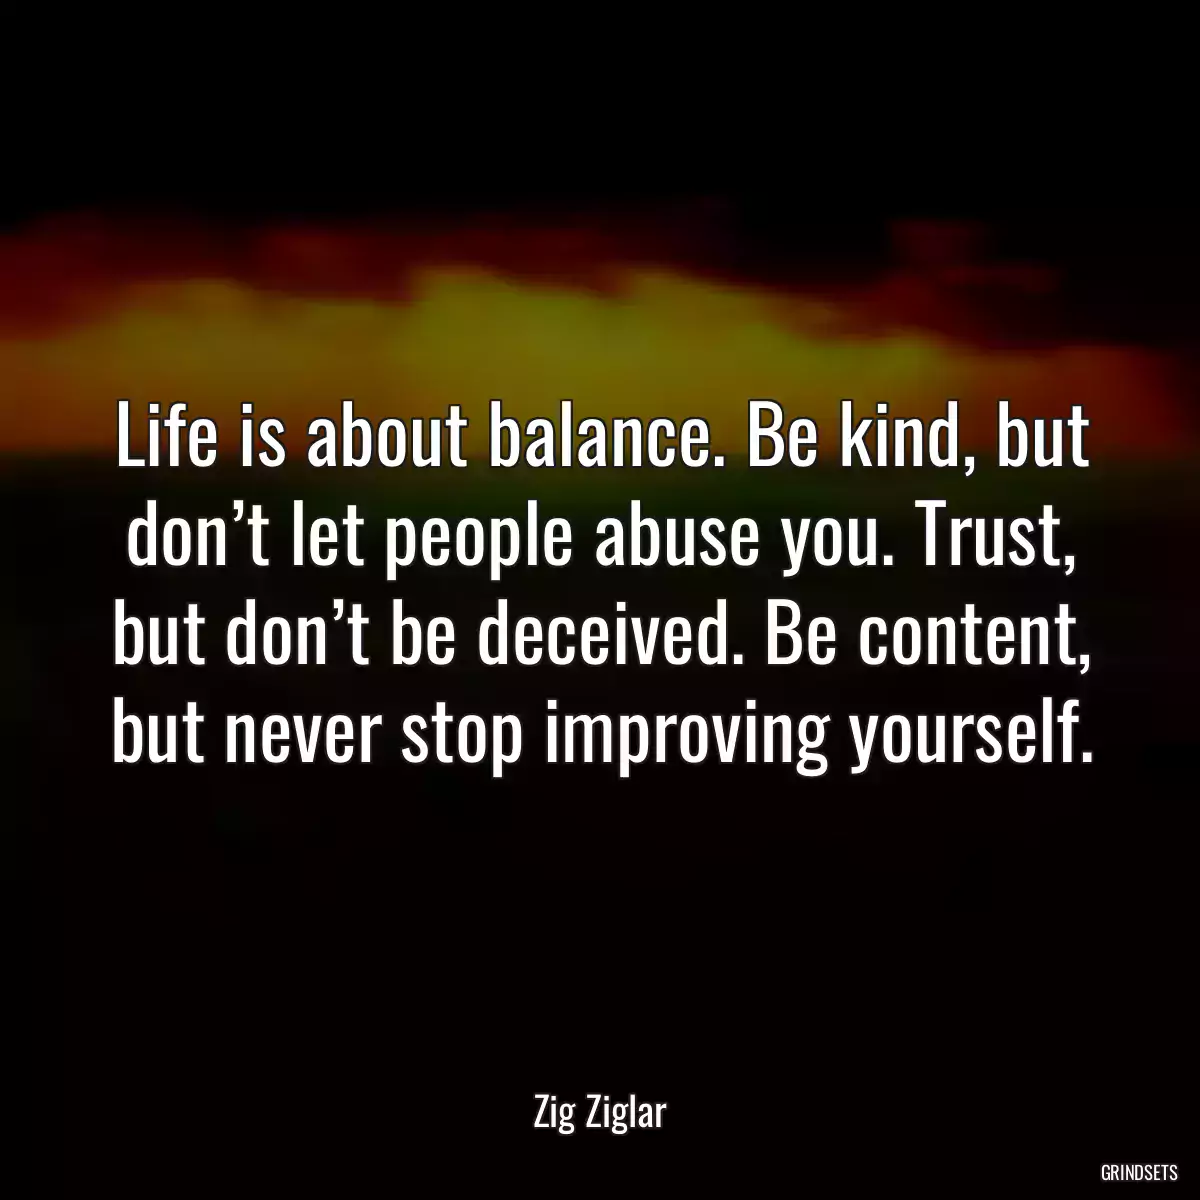 Life is about balance. Be kind, but don’t let people abuse you. Trust, but don’t be deceived. Be content, but never stop improving yourself.